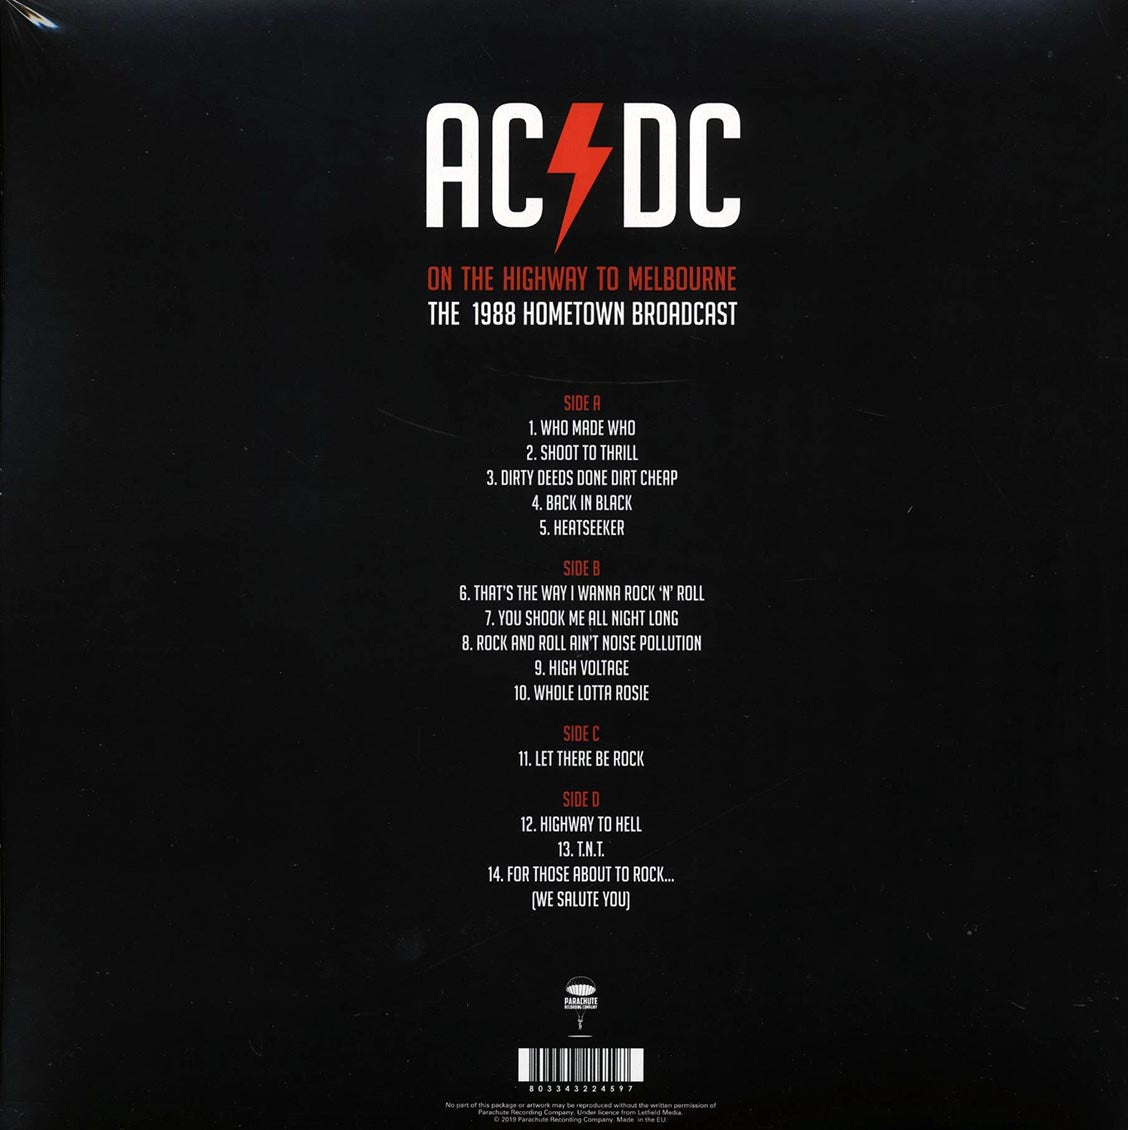 AC/DC - On The Highway To Melbourne: The 1988 Hometown Broadcast 2xLP Vinyl | Parachute, 1988 | Soundtraxx Item No. 276865